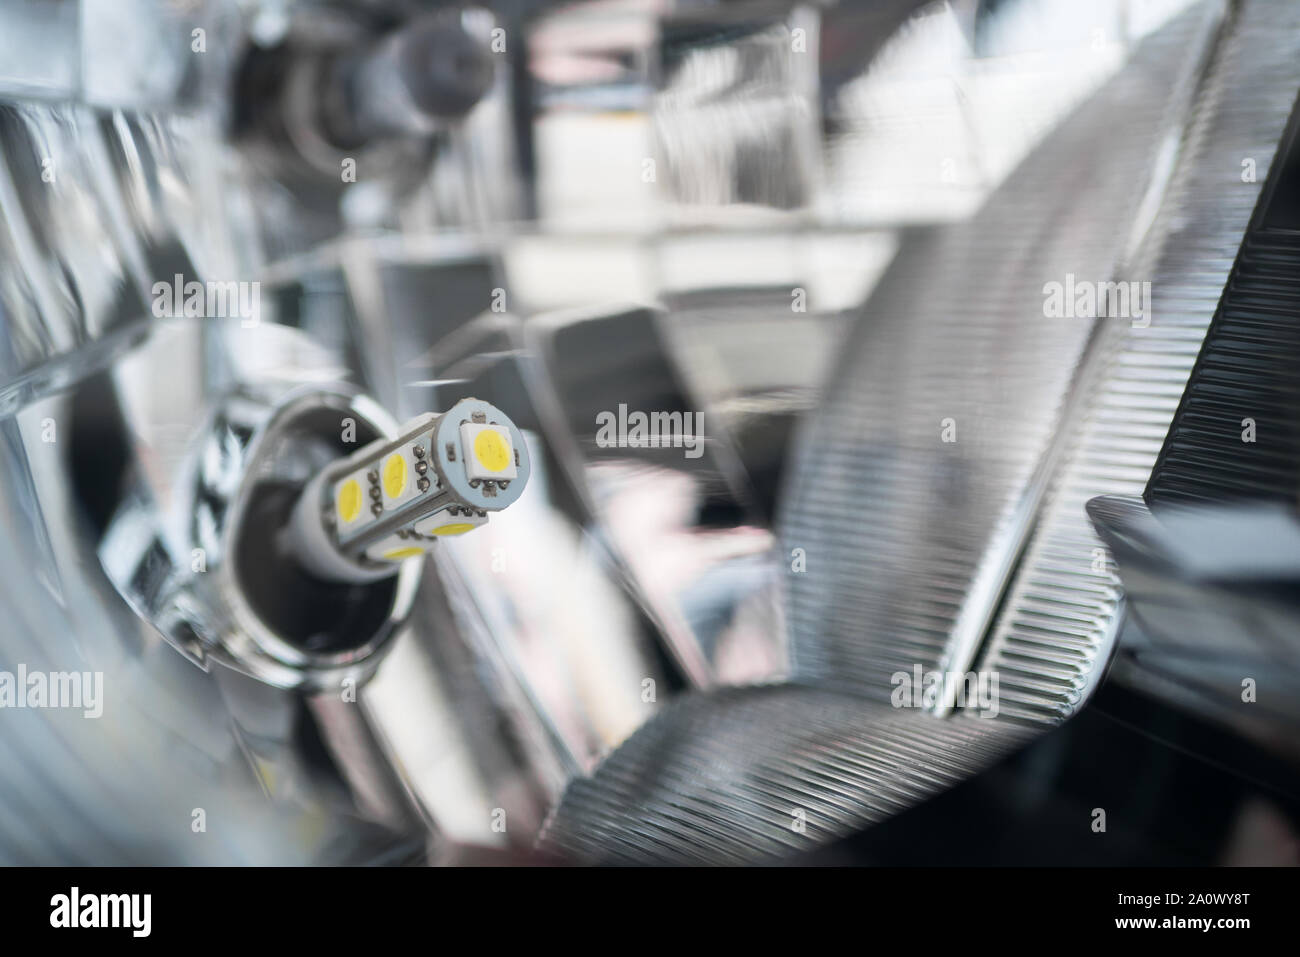 Close-up view of the LED Light Car Headlight. Stock Photo